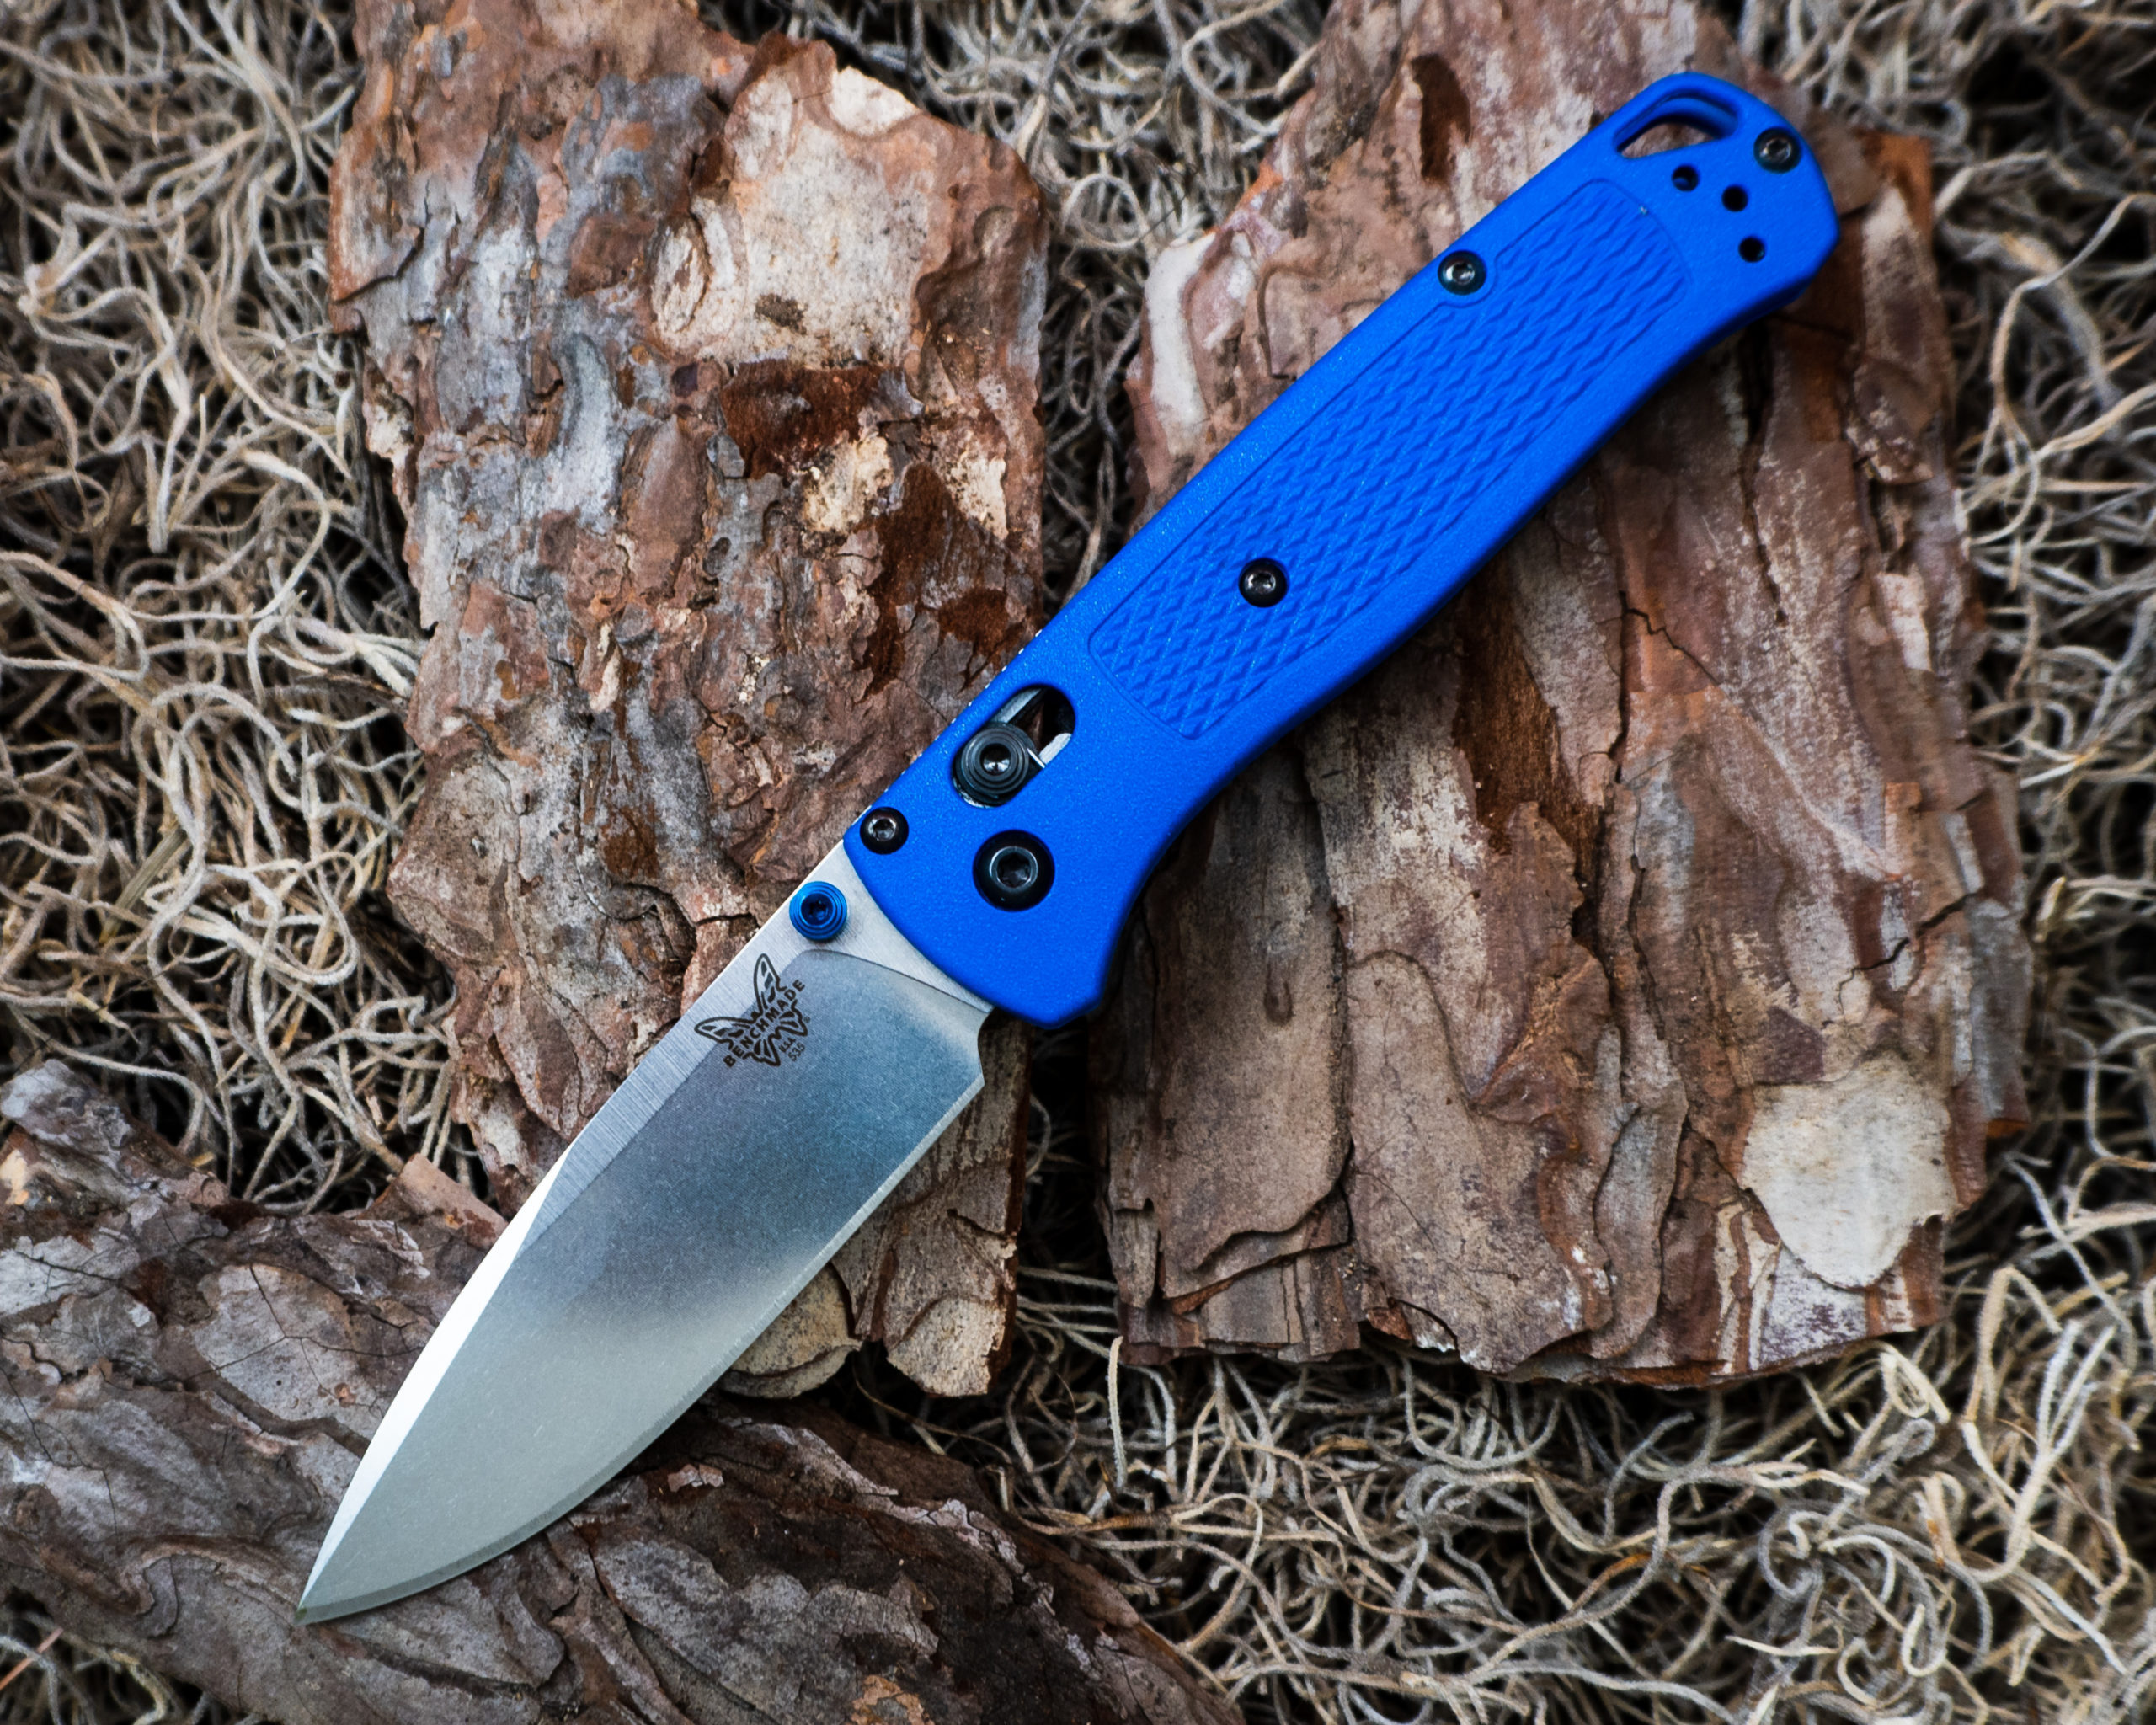 REVIEW Benchmade Bugout The Essential Lightweight EDC Folder